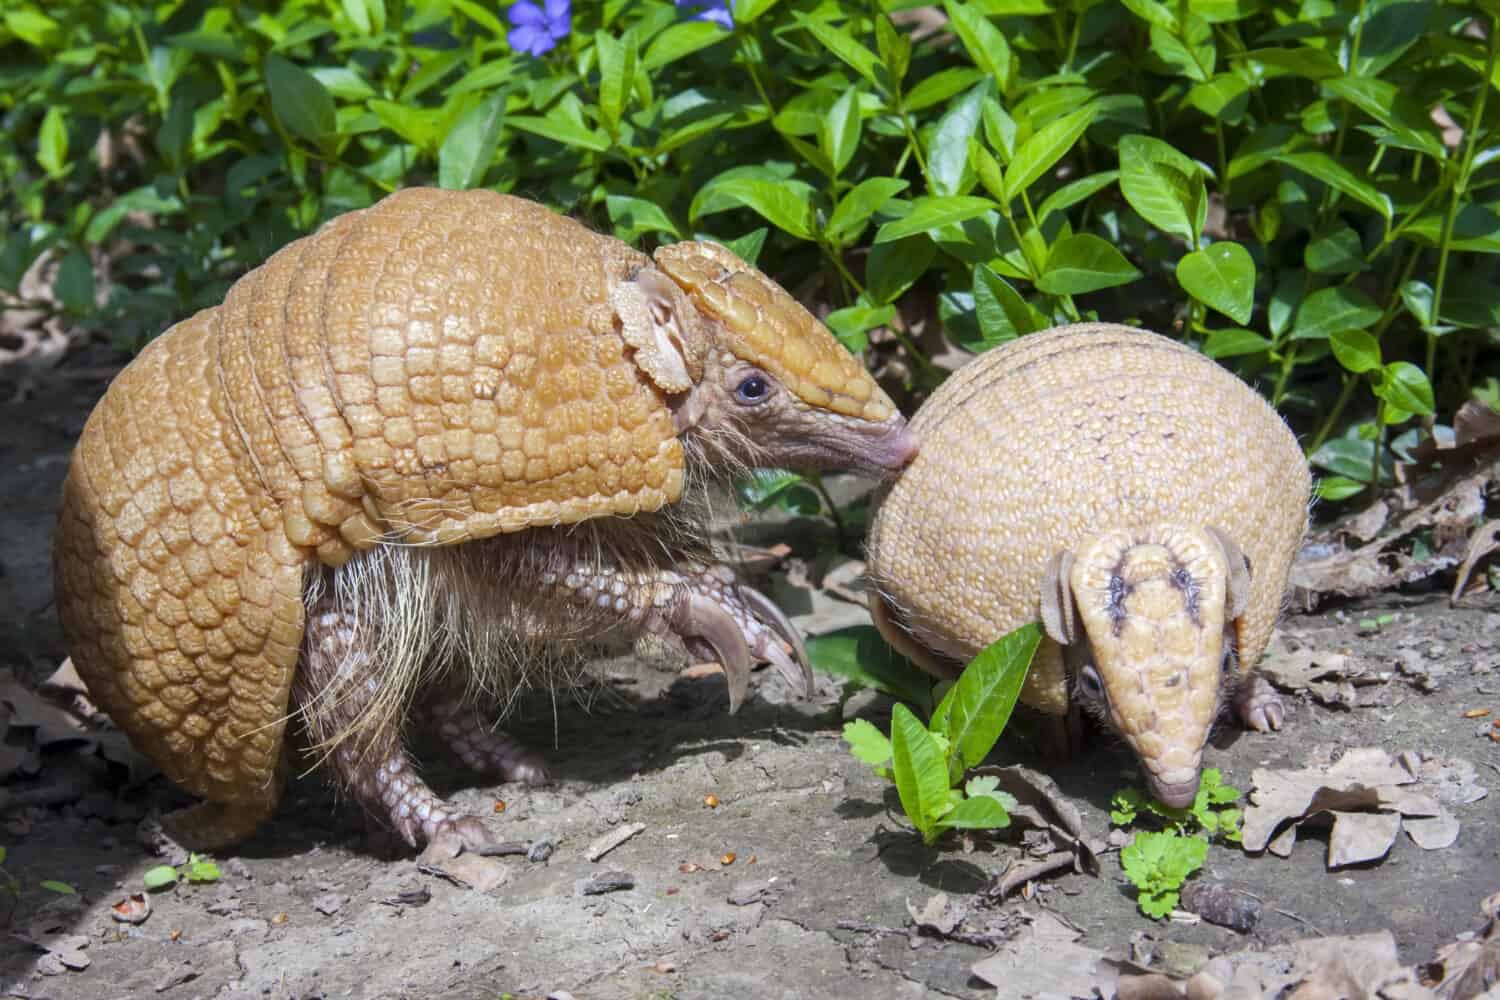 Southern three-banded armadillo (Tolypeutes matacus) mother and baby in the grass